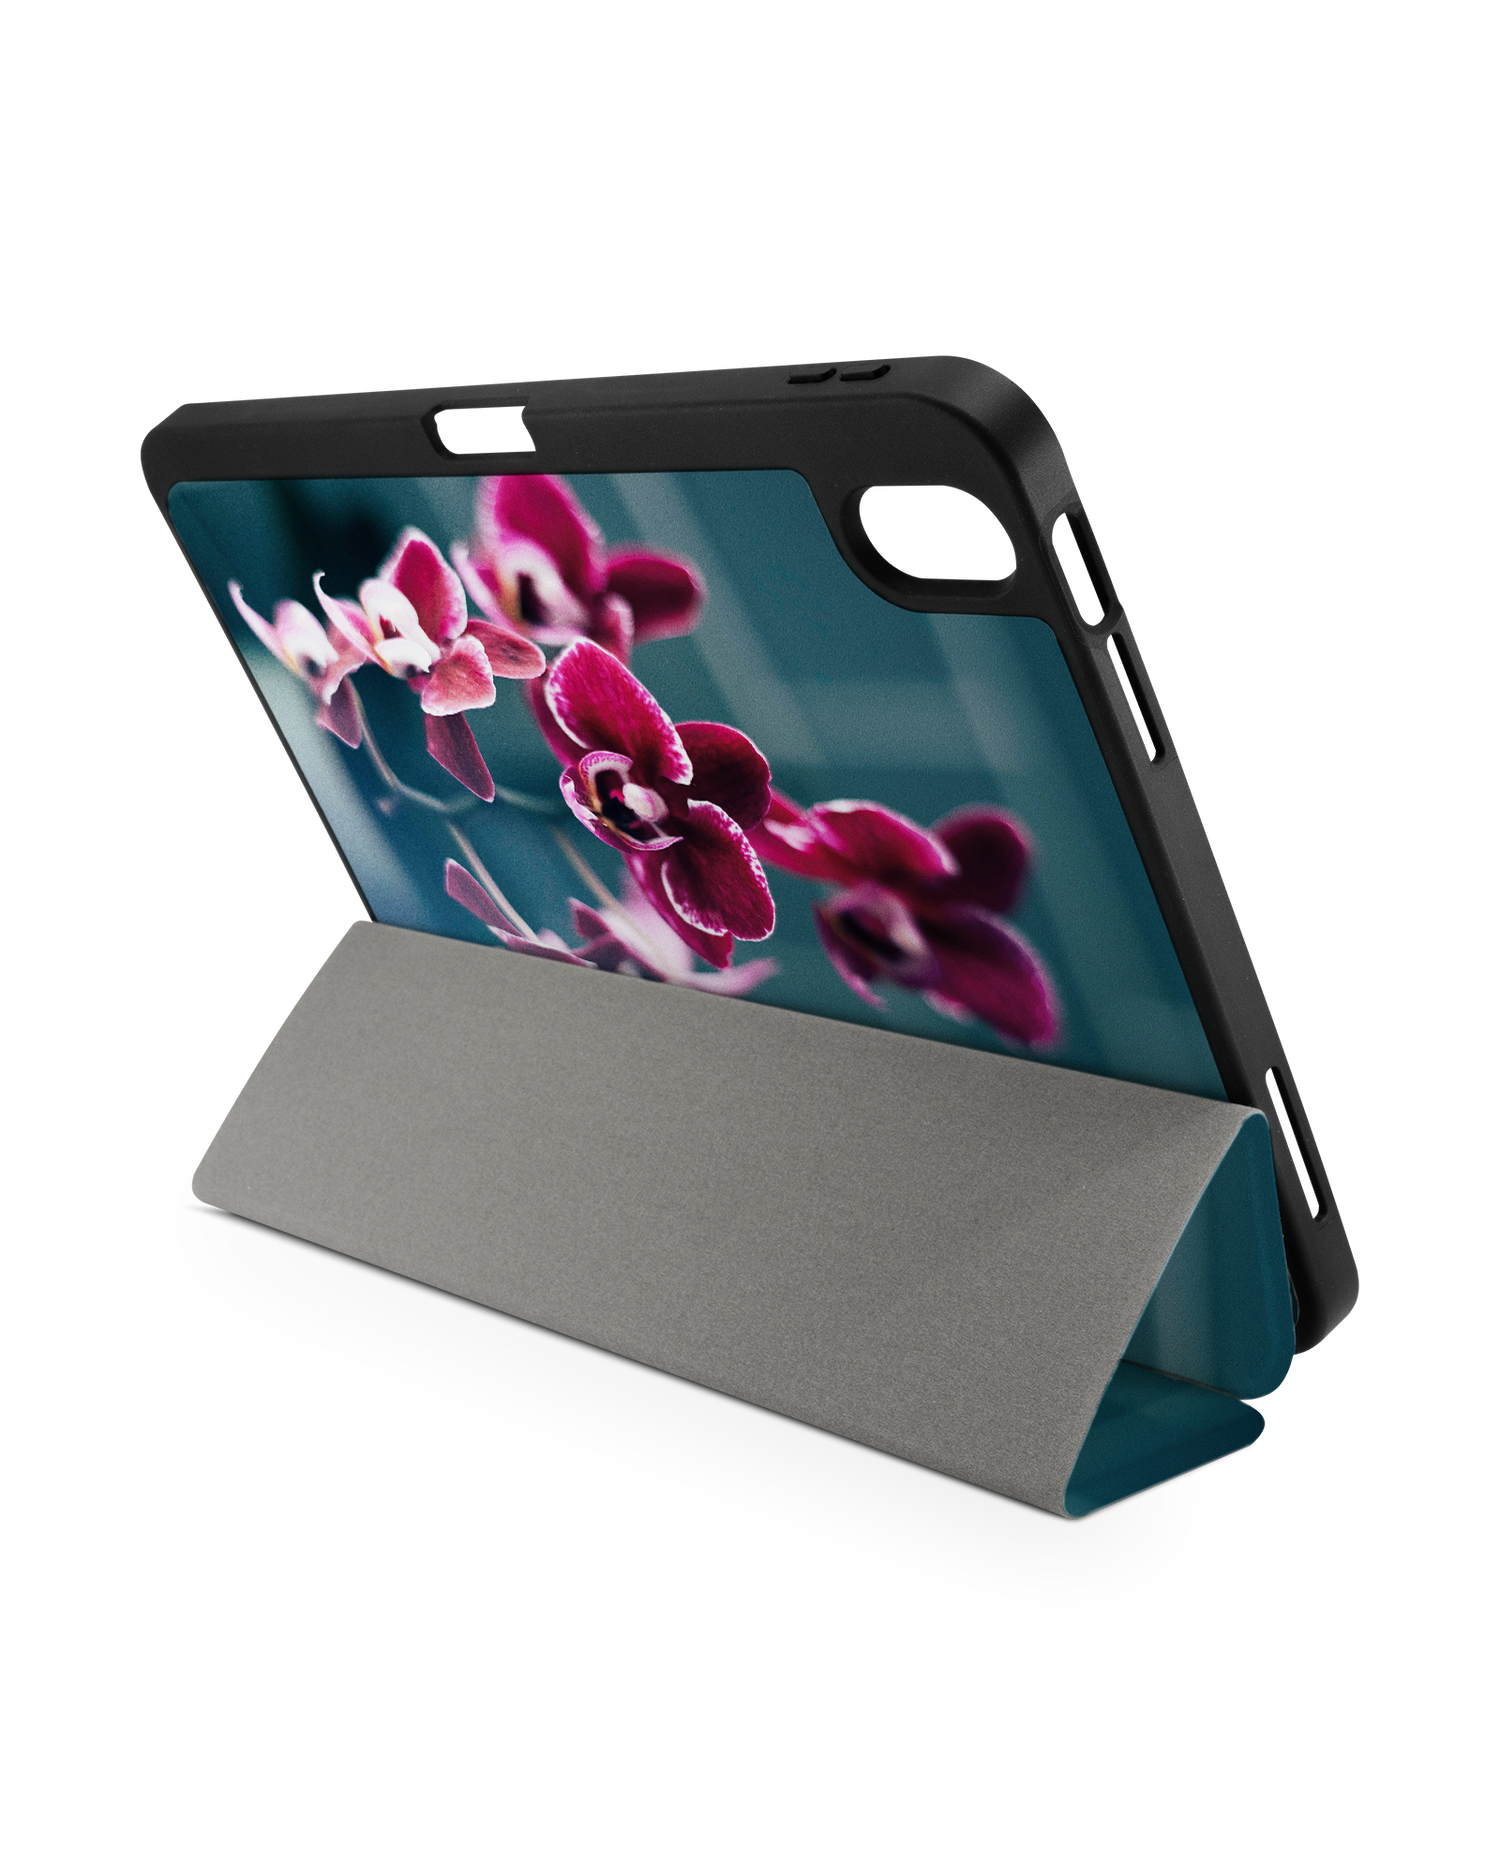 Orchid iPad Case with Pencil Holder for Apple iPad (10th Generation): Set up in landscape format (back view)